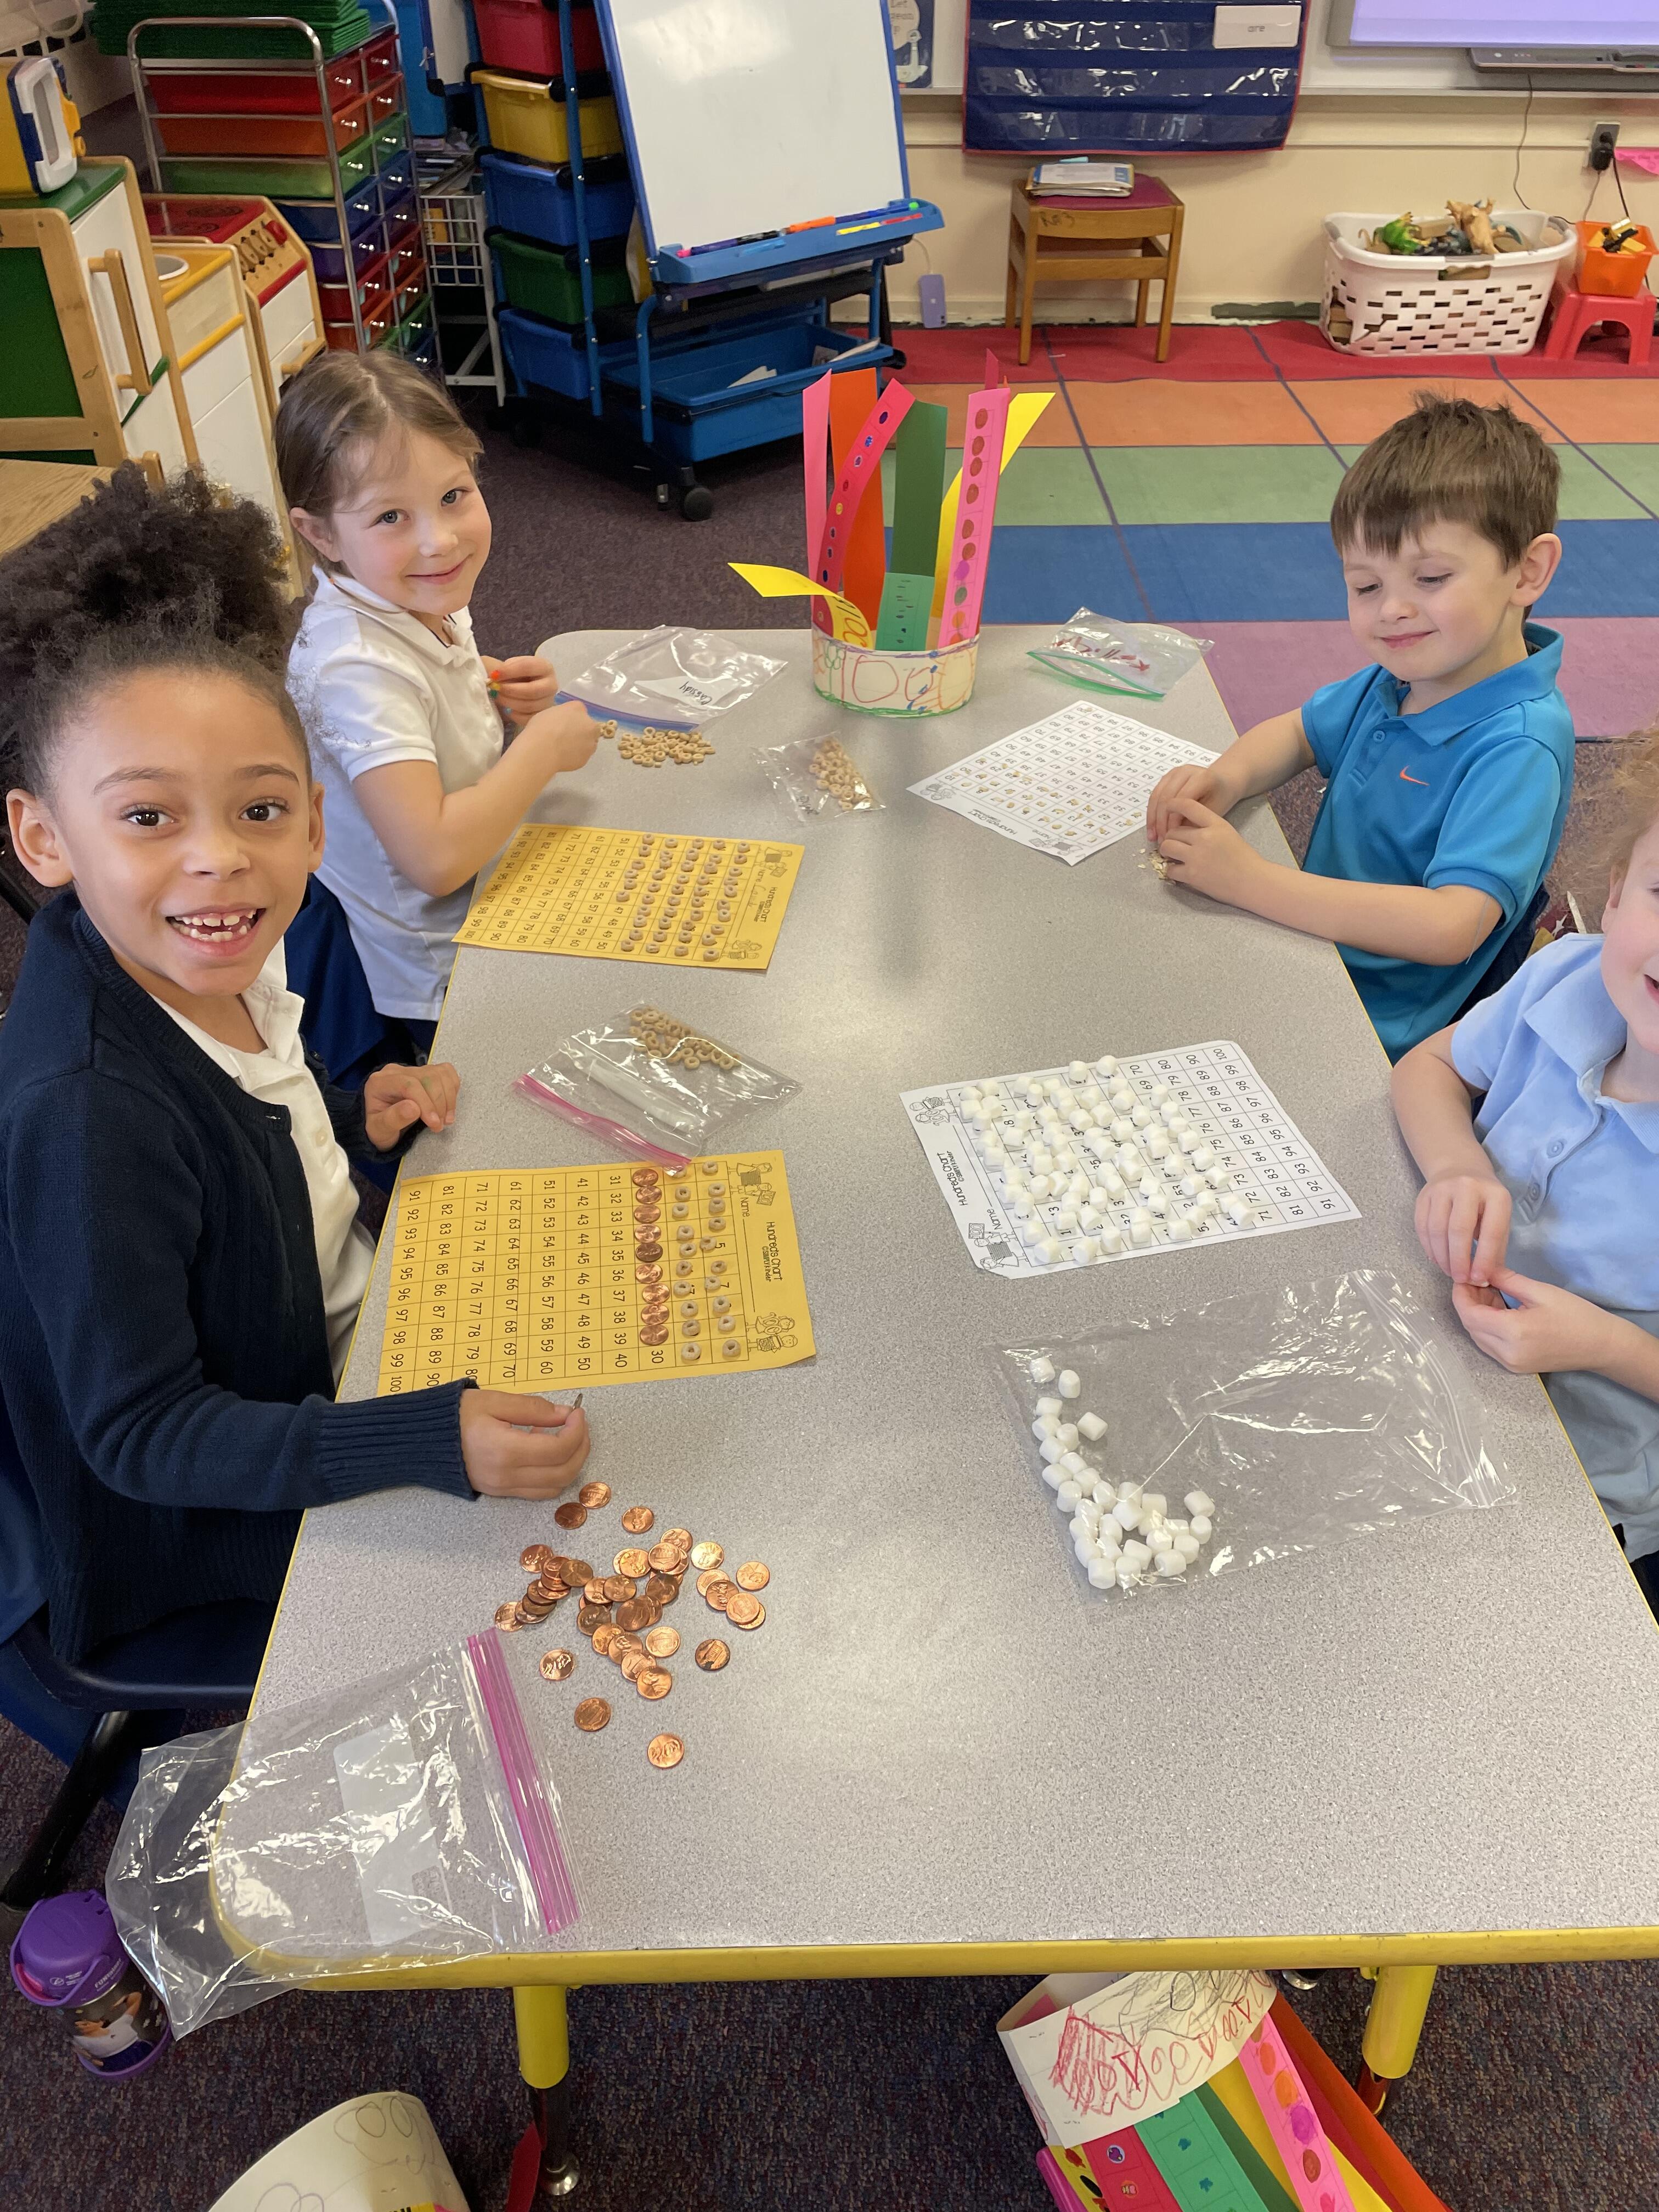 Park students count items up to 100 to celebrate the 100th day of school